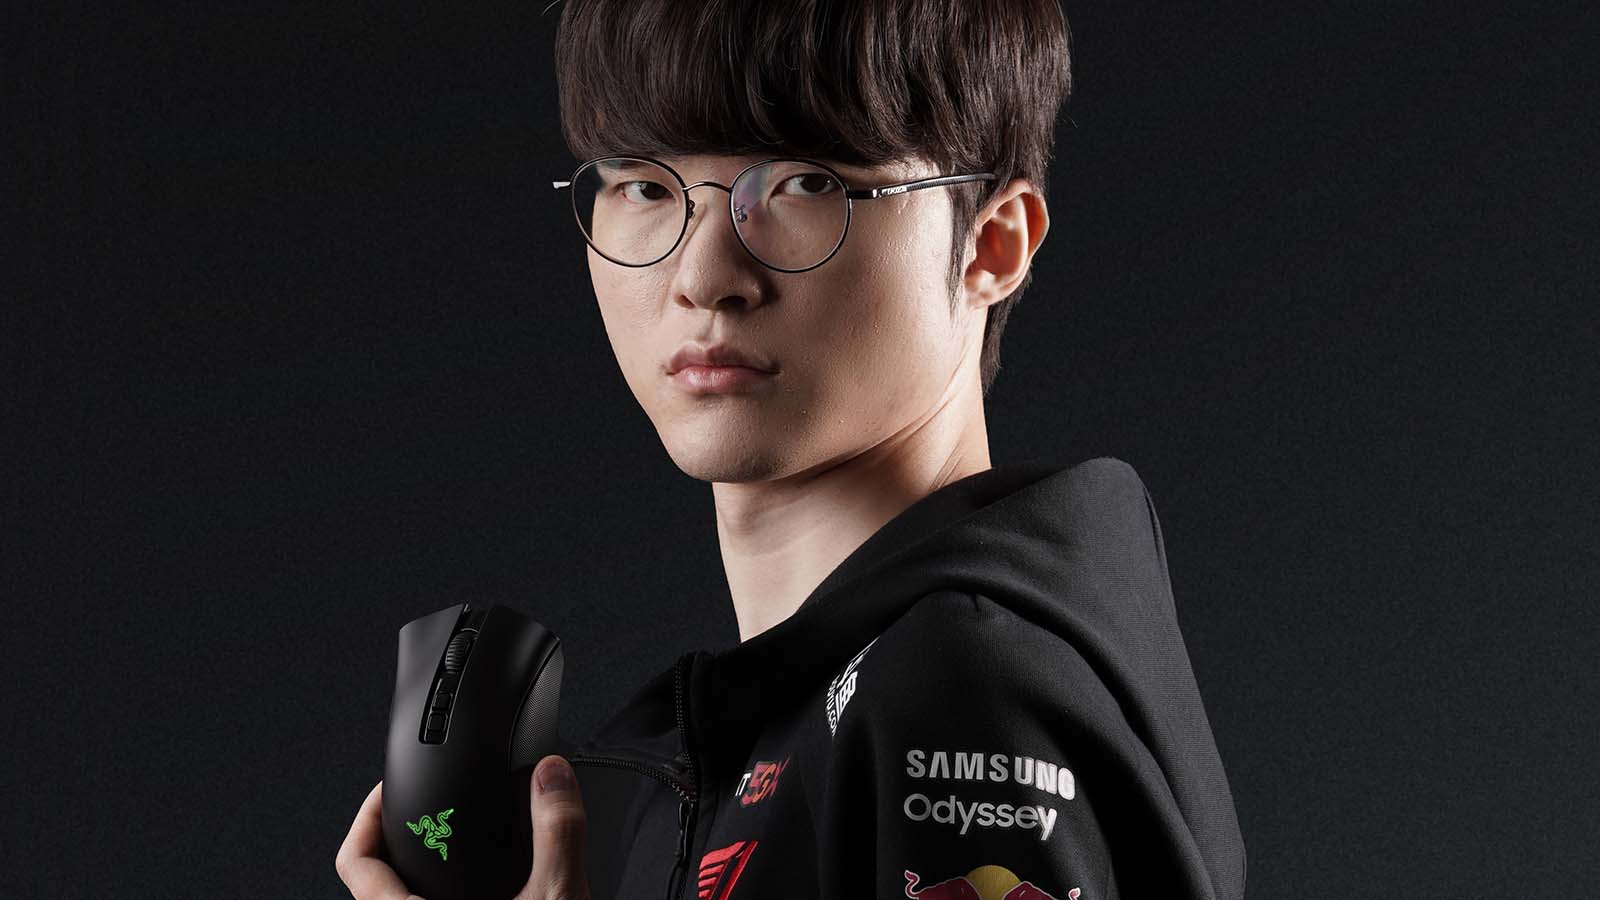 Faker with Razer mouse